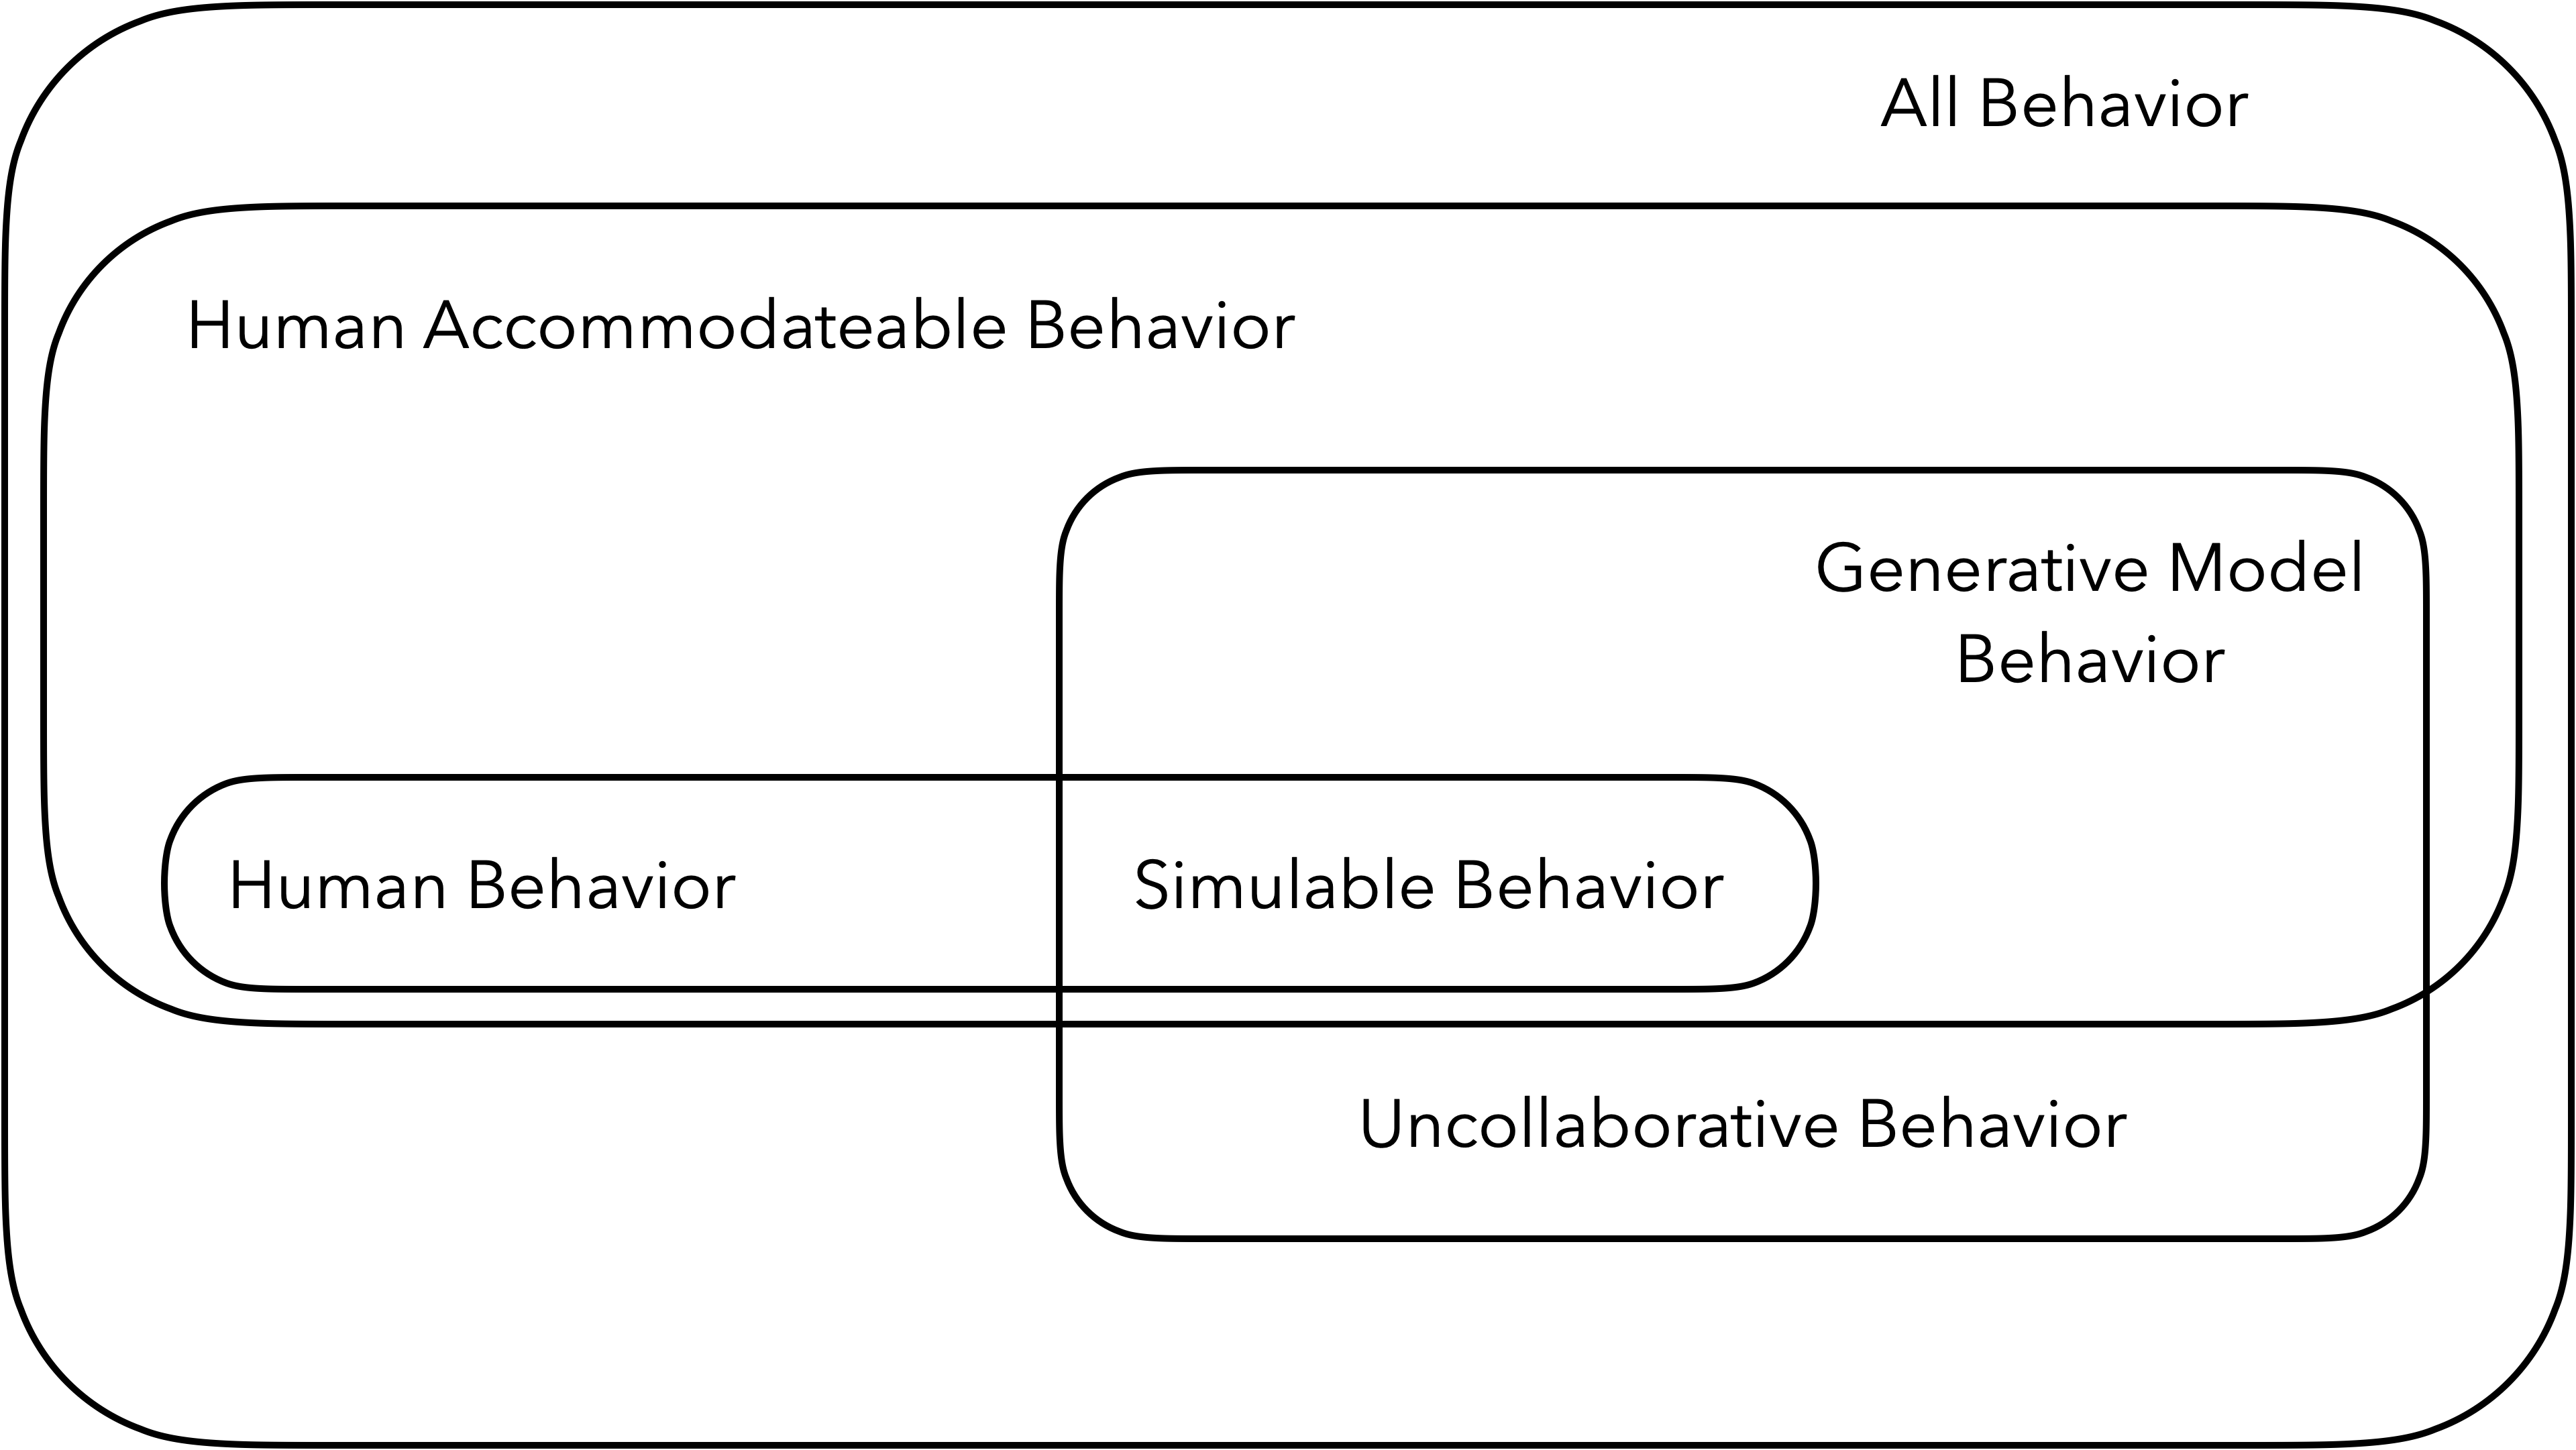 A Venn diagram of the space of all possible behavior. Human behavior is a small percentage of all possible behavior, but human *accommodateable* behavior is a much larger swathe of behavior than just human behavior, which we here represent as a strict superset of human behavior though this is contestable. Generative model behavior overlaps with both of these to some degree, but also contains behavior that is in neither. We call the region where generative model behavior overlaps with human behavior "simulable behavior" and the region where generative model behavior is not even human accomodateable, we call "uncollaborative behavior".